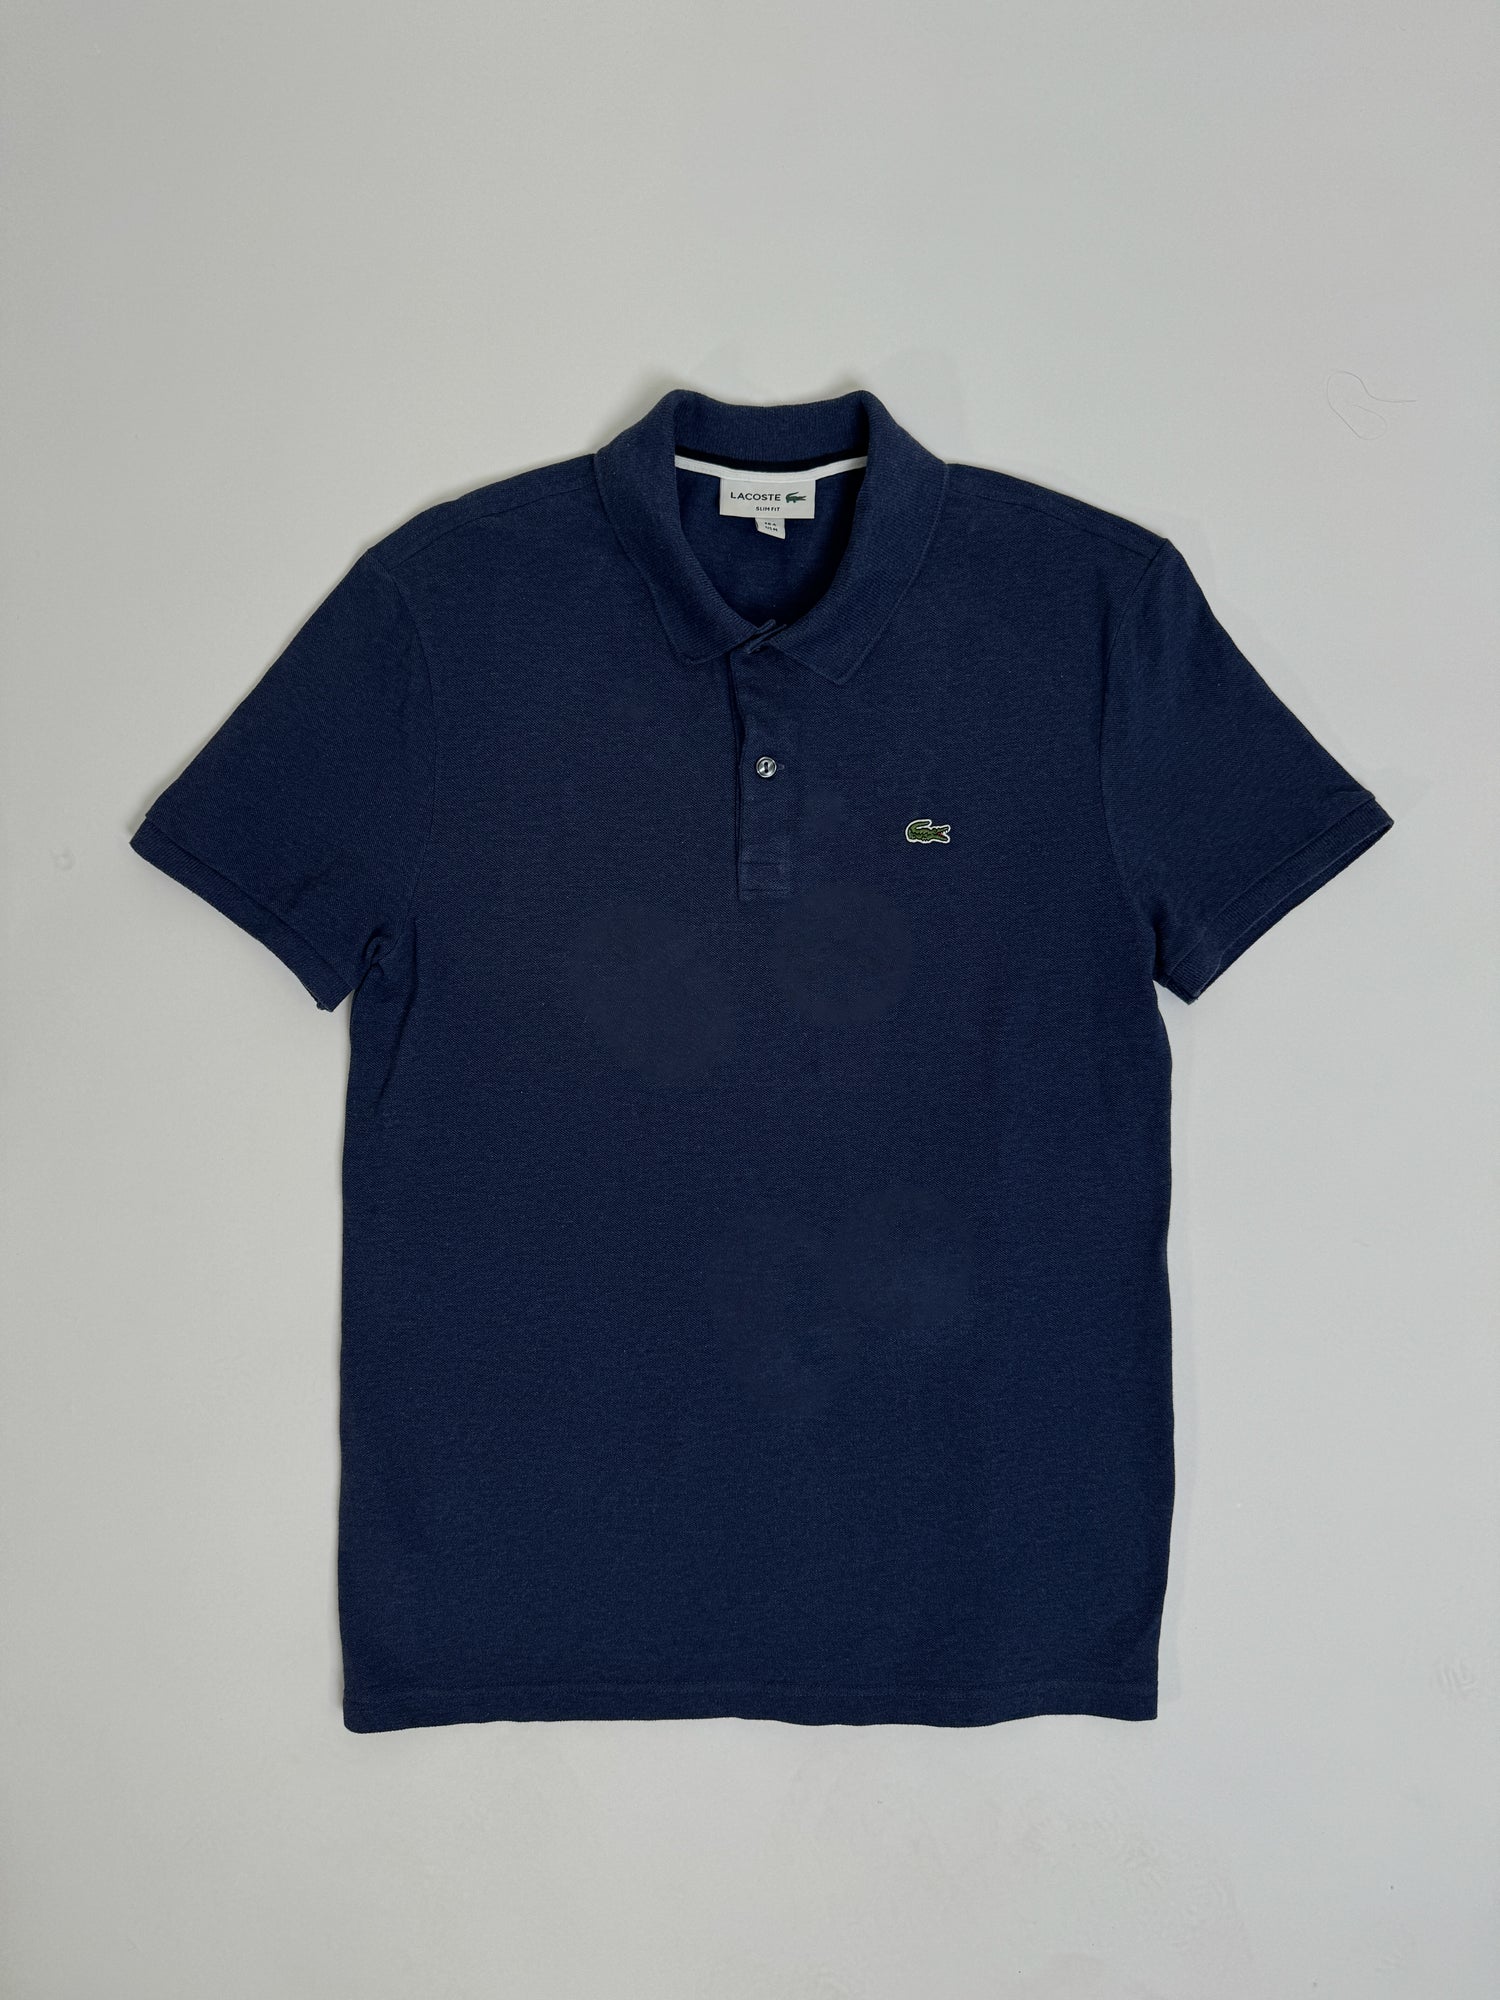 Lacoste Navy Slim Fit Cotton Polo Shirt